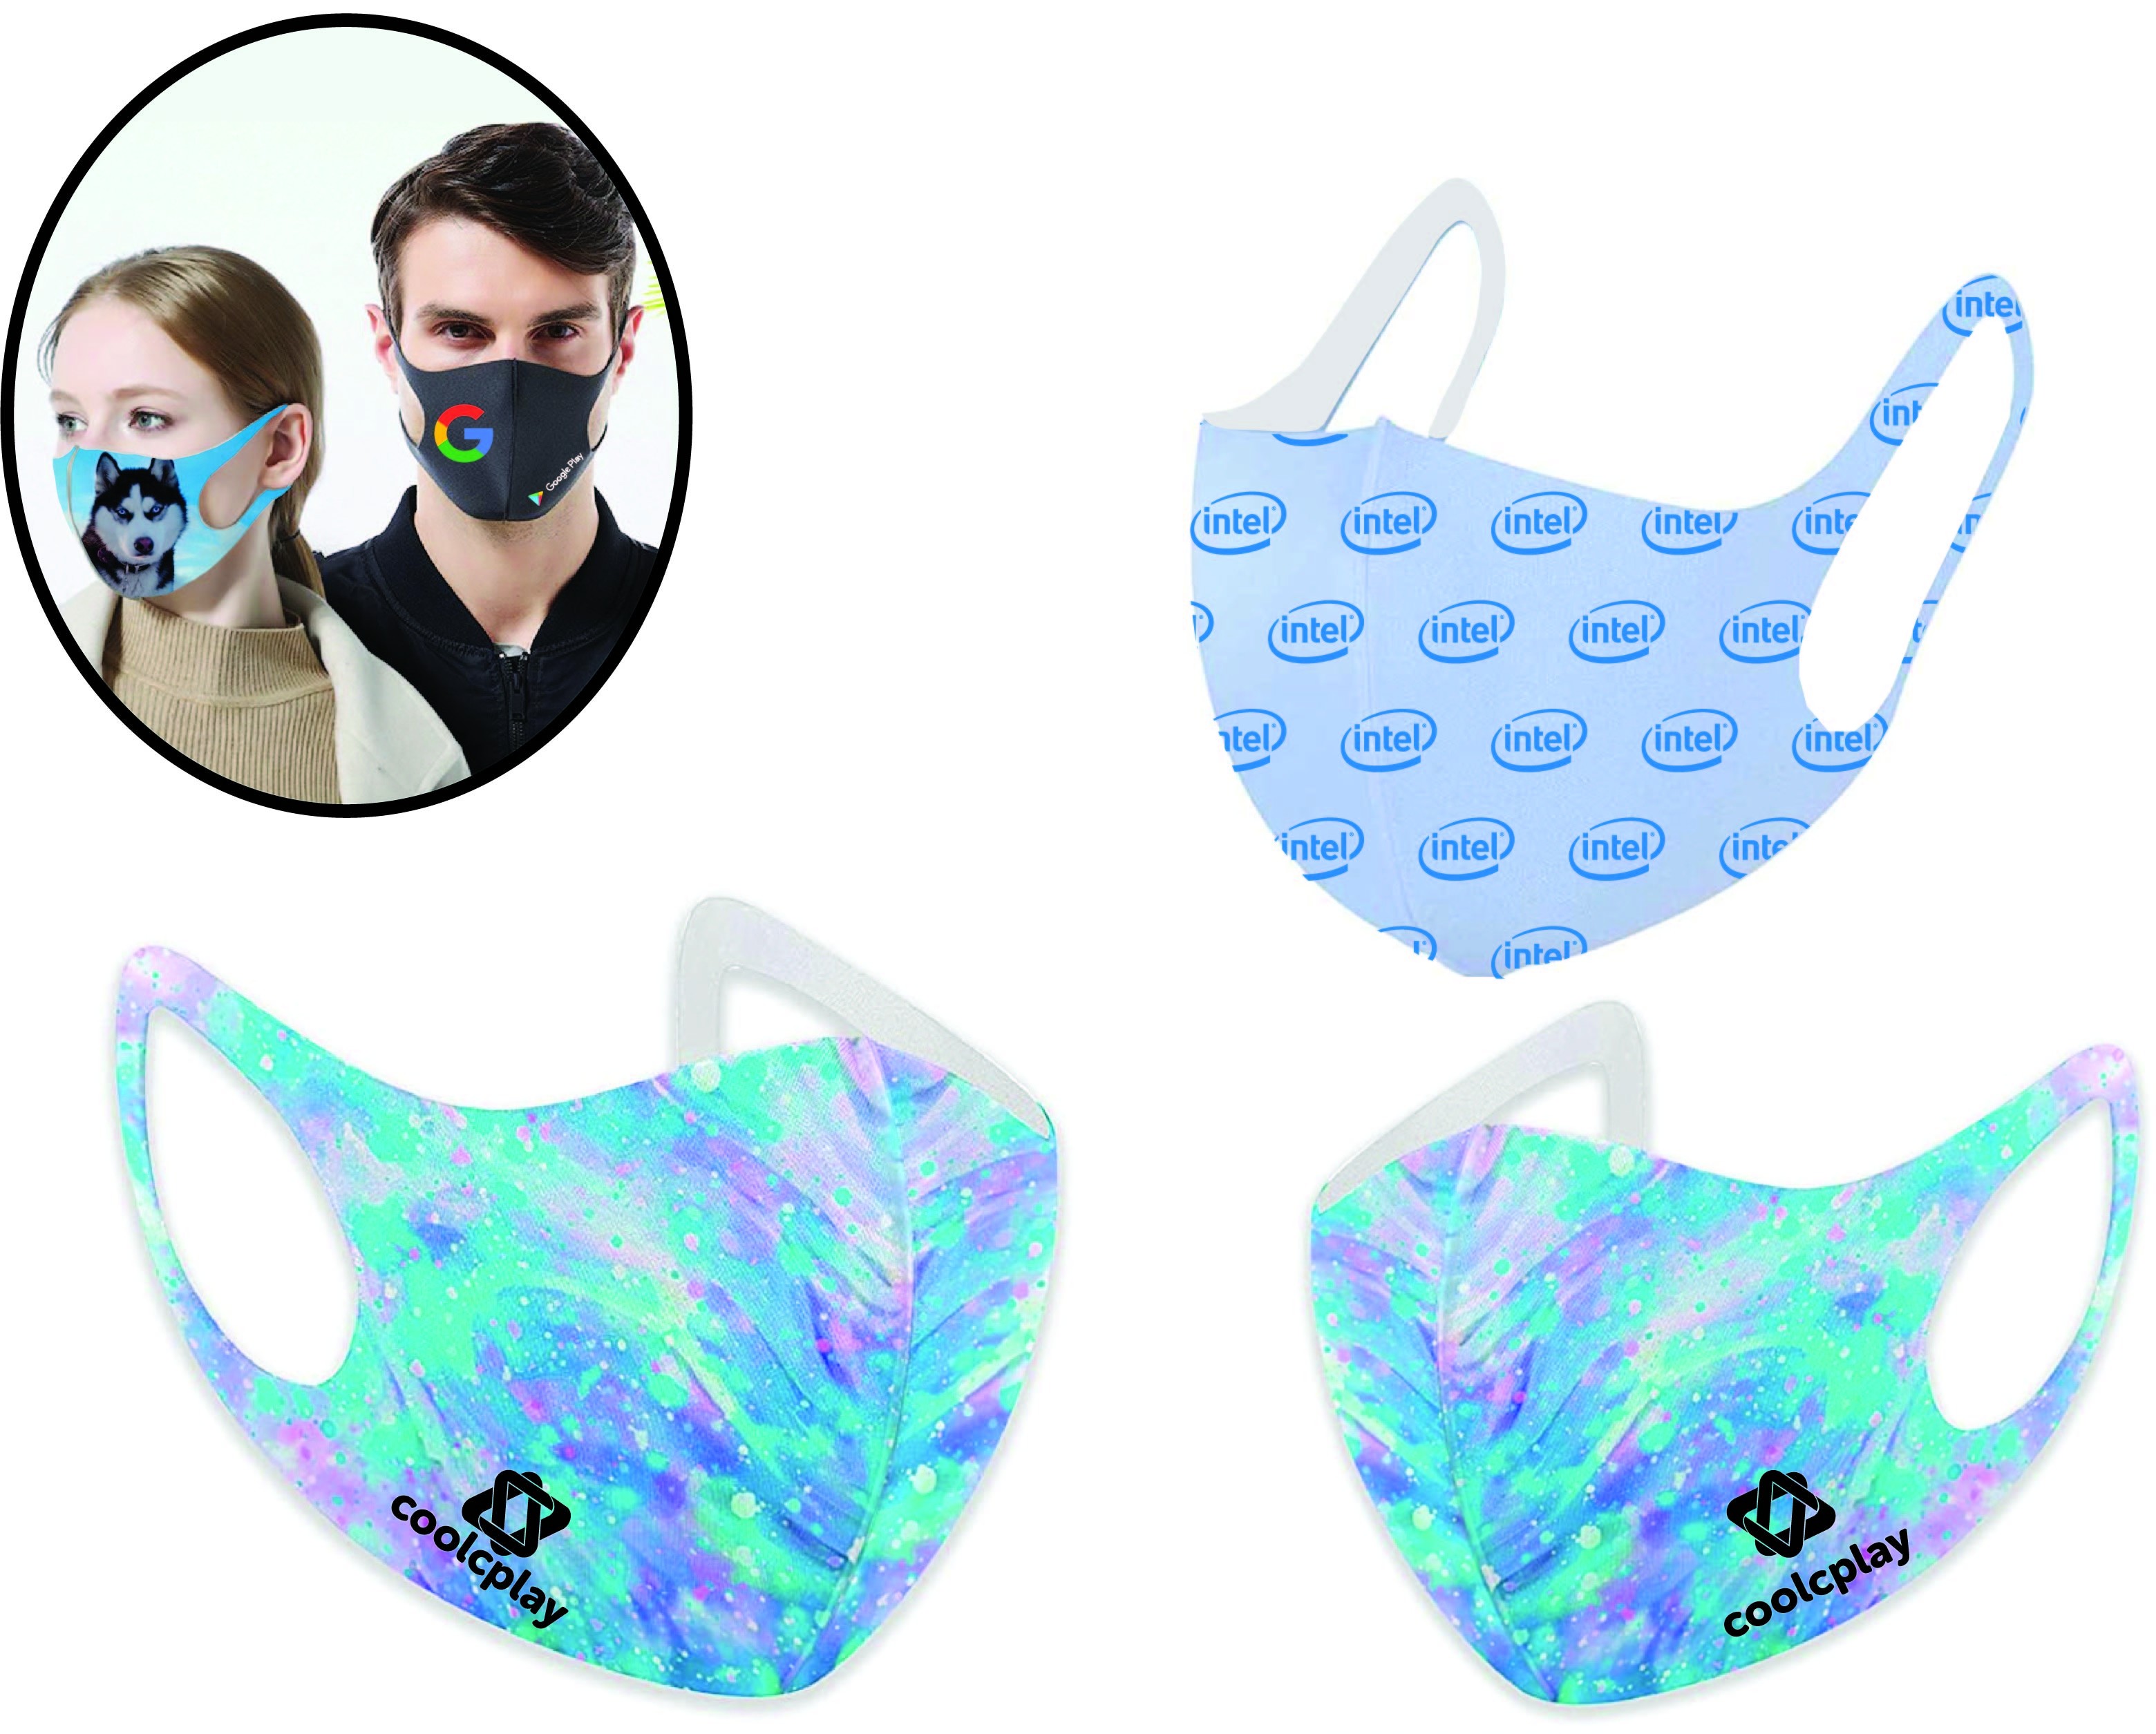 Face Mask. Super Soft, Cool, Comfortable. Bacteriostatic Reduction Rate of 99.9% - VIVID FULL COLOR